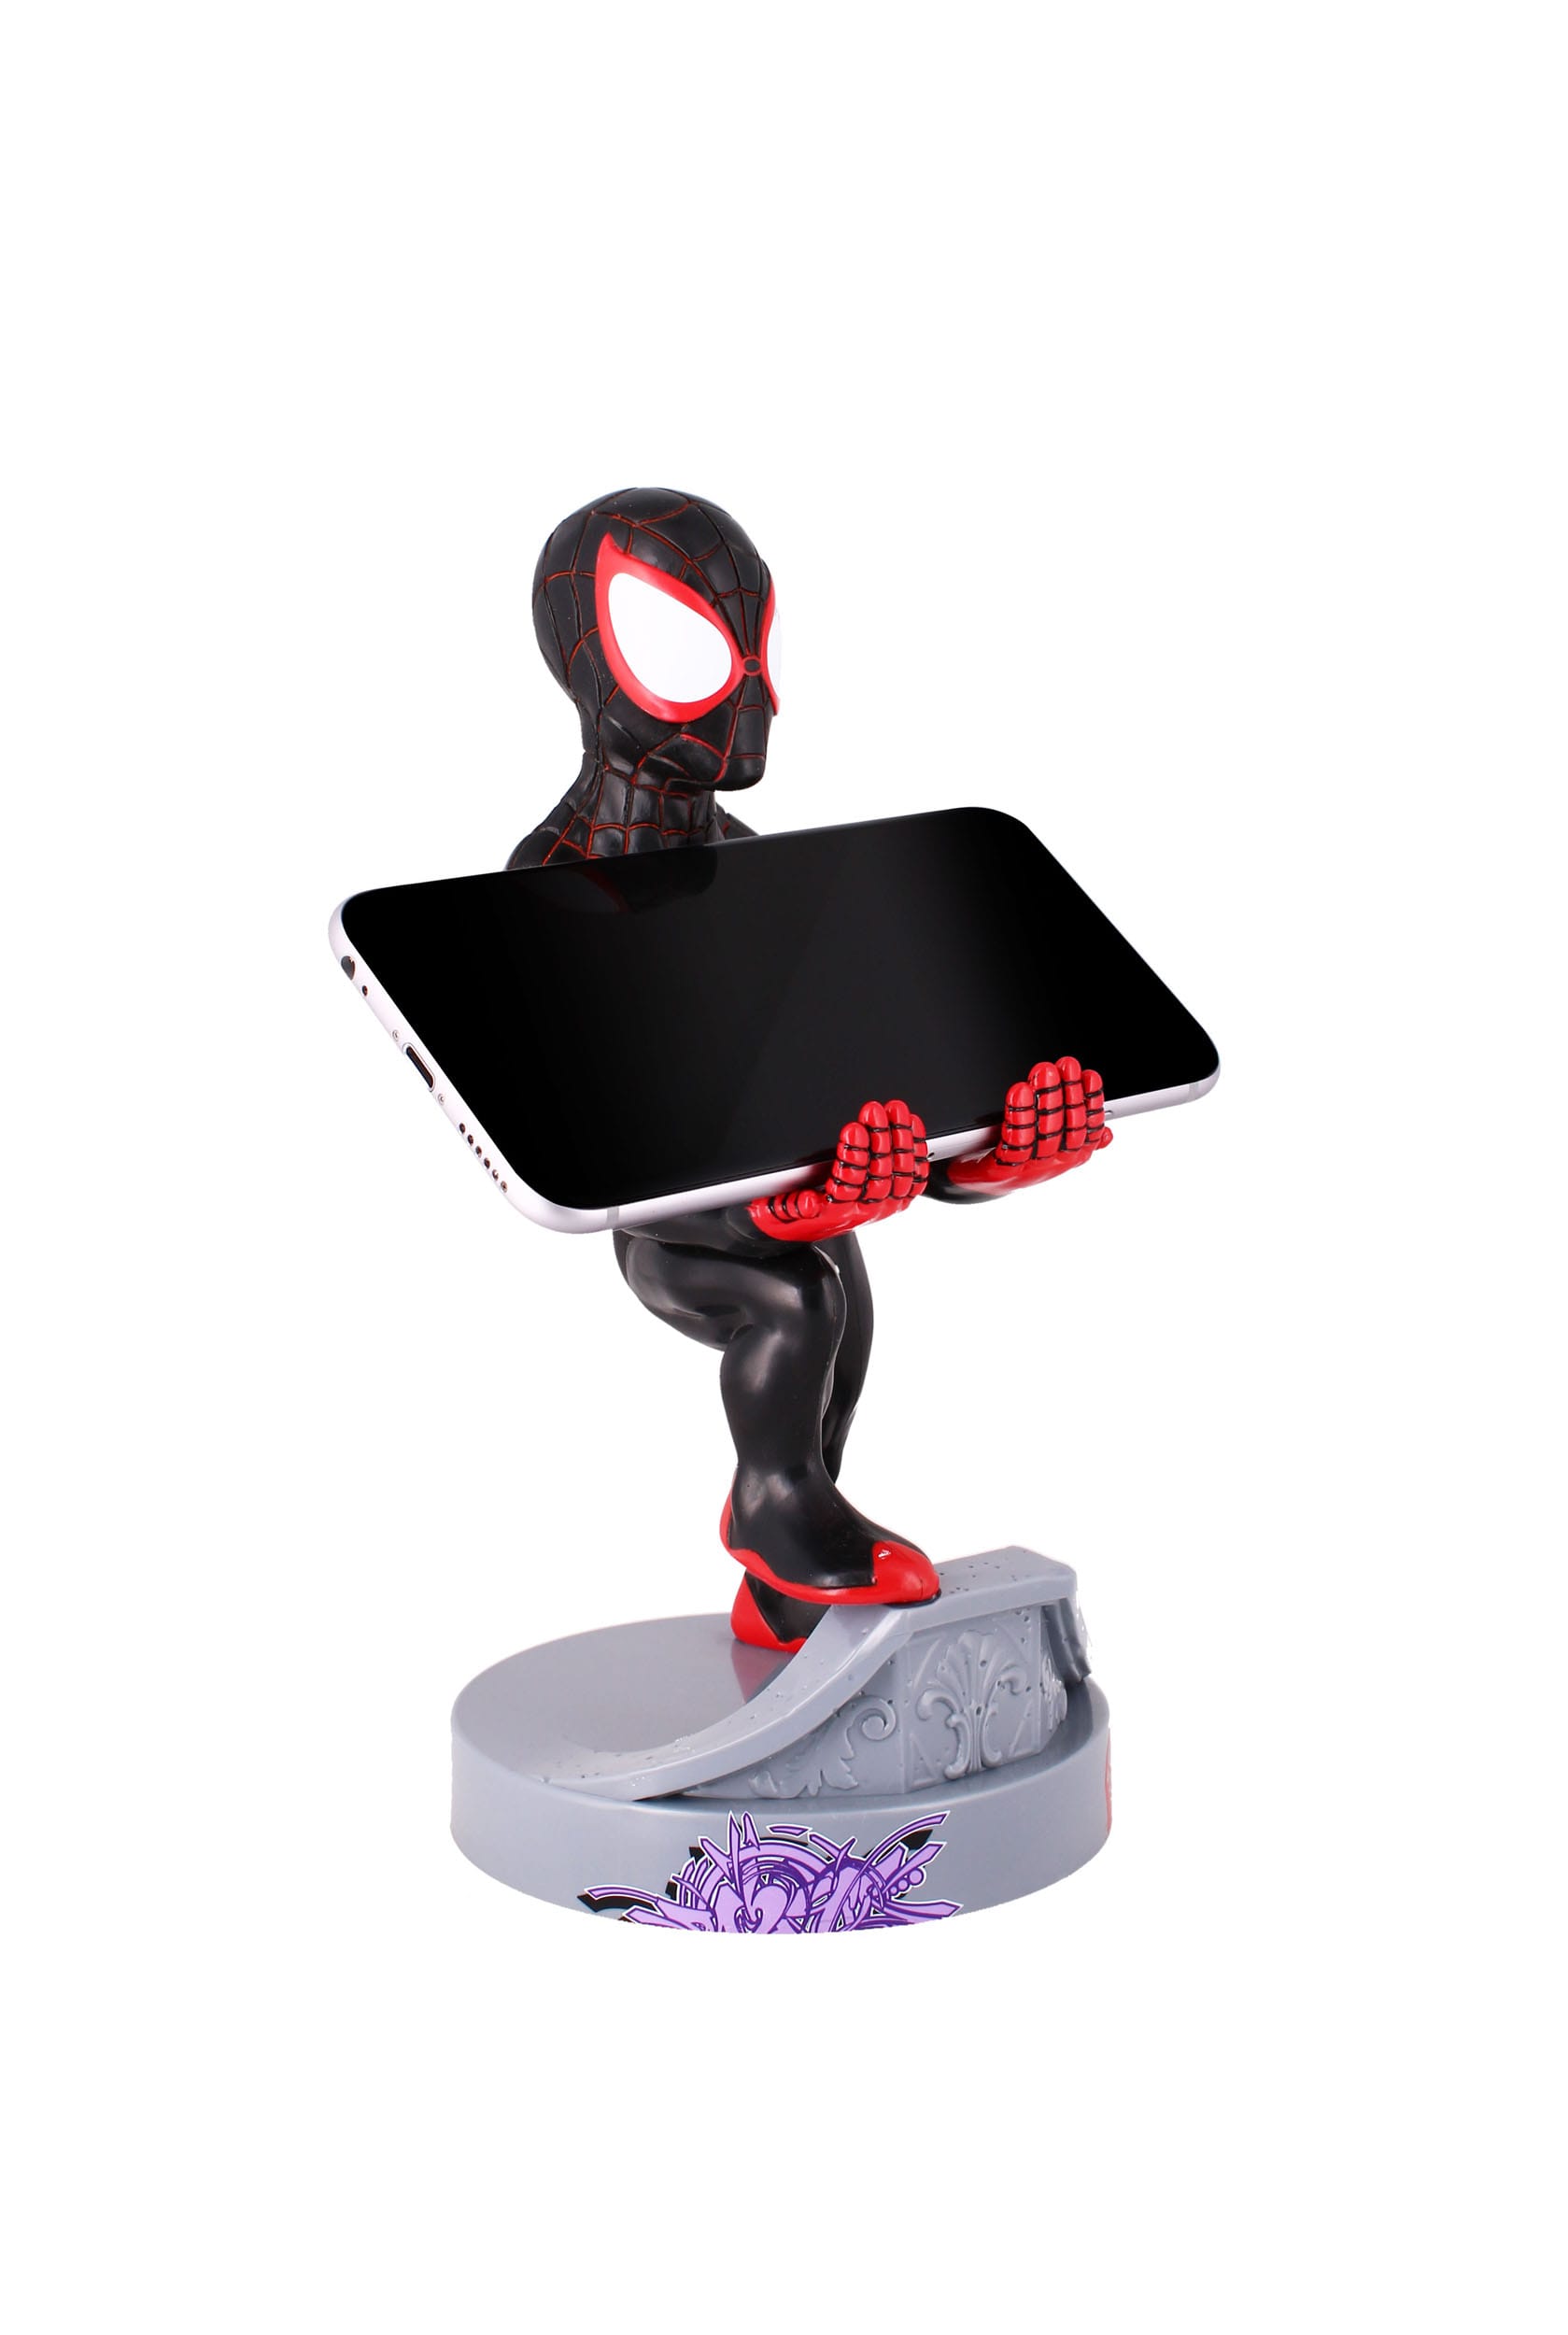 SPIDER-MAN MILES MORALES - 20cm Figure - Spider-Man Cable Guy